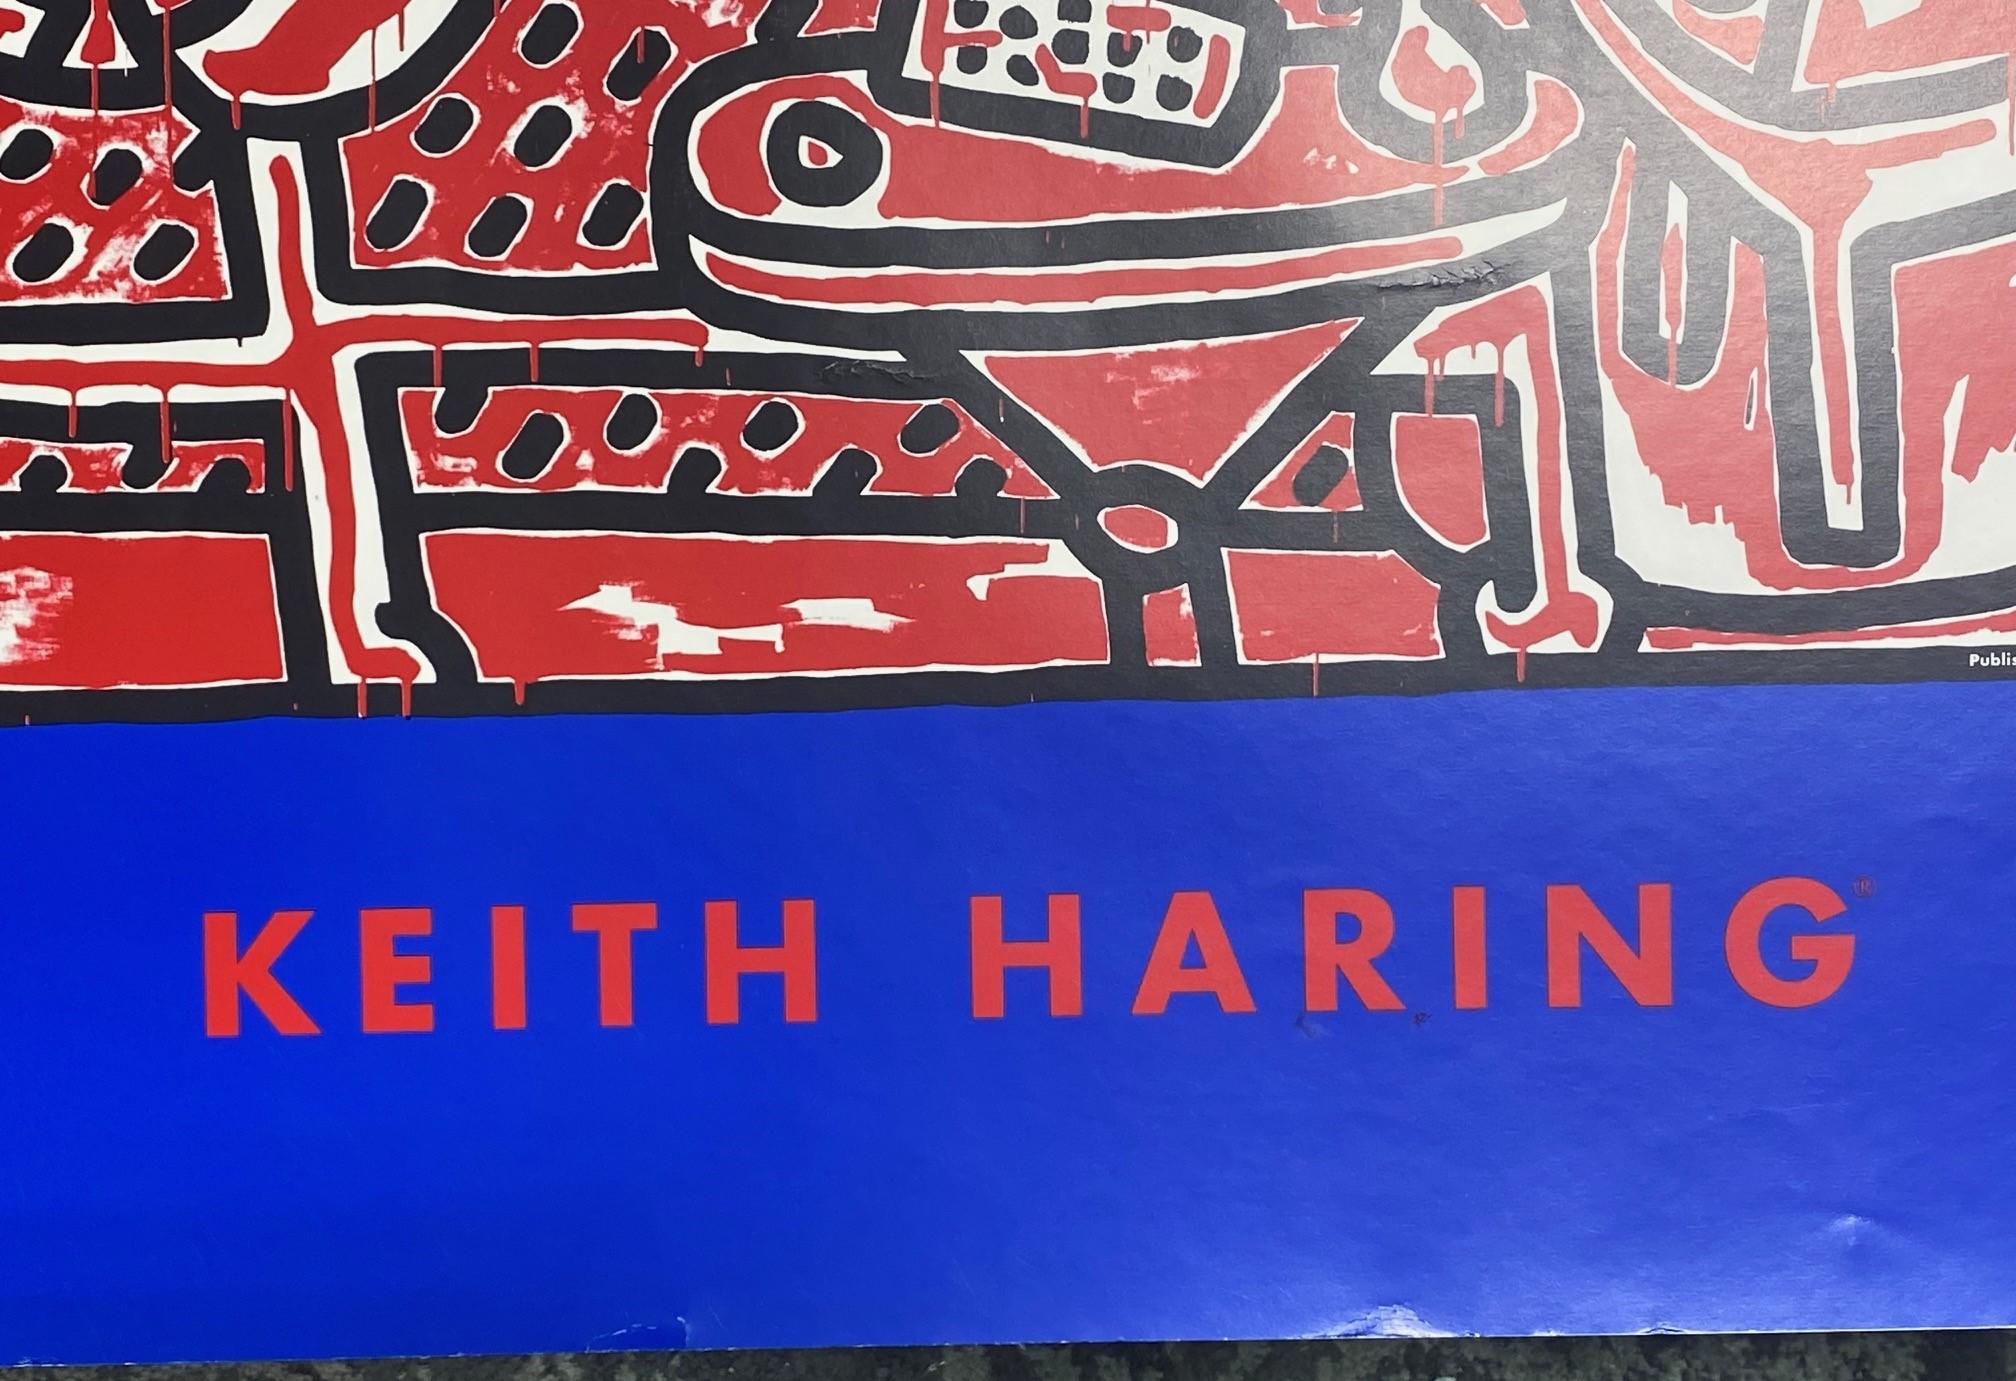 Paper Keith Haring Vintage NYC Pop Shop te Neues Art Lithograph Poster Red Room, 1993 For Sale